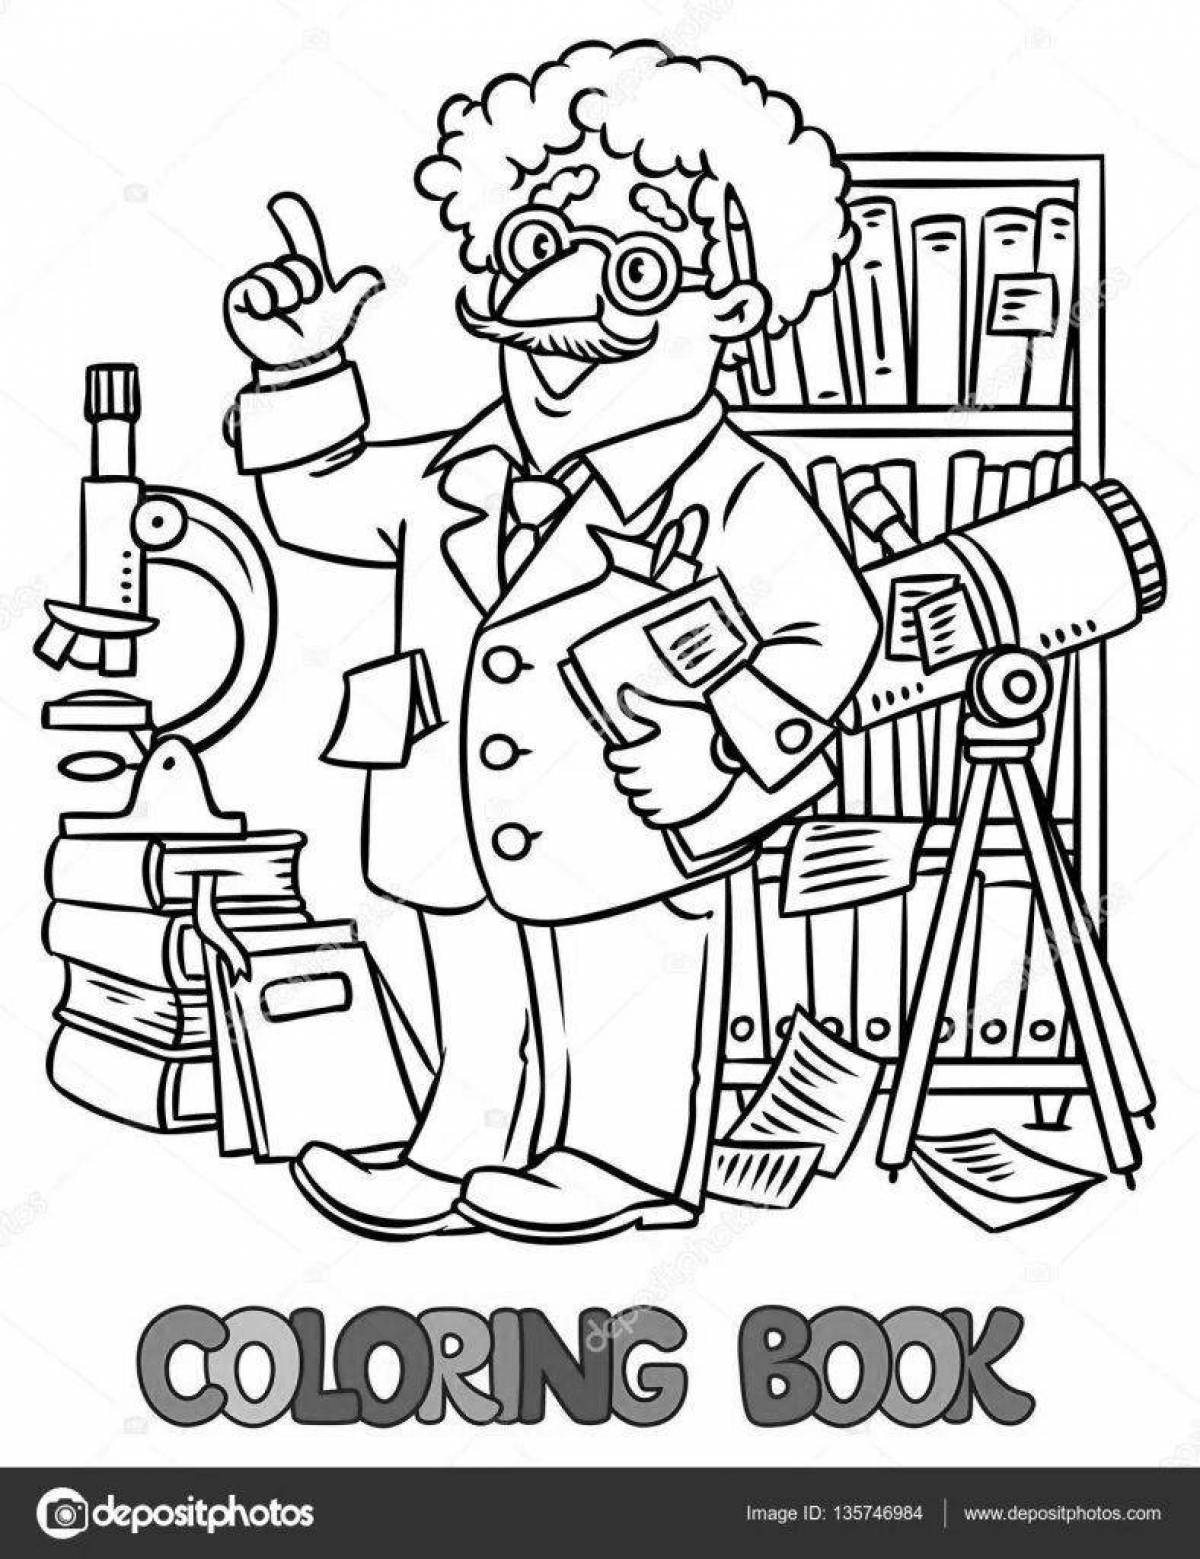 Coloring pages scientists for kids